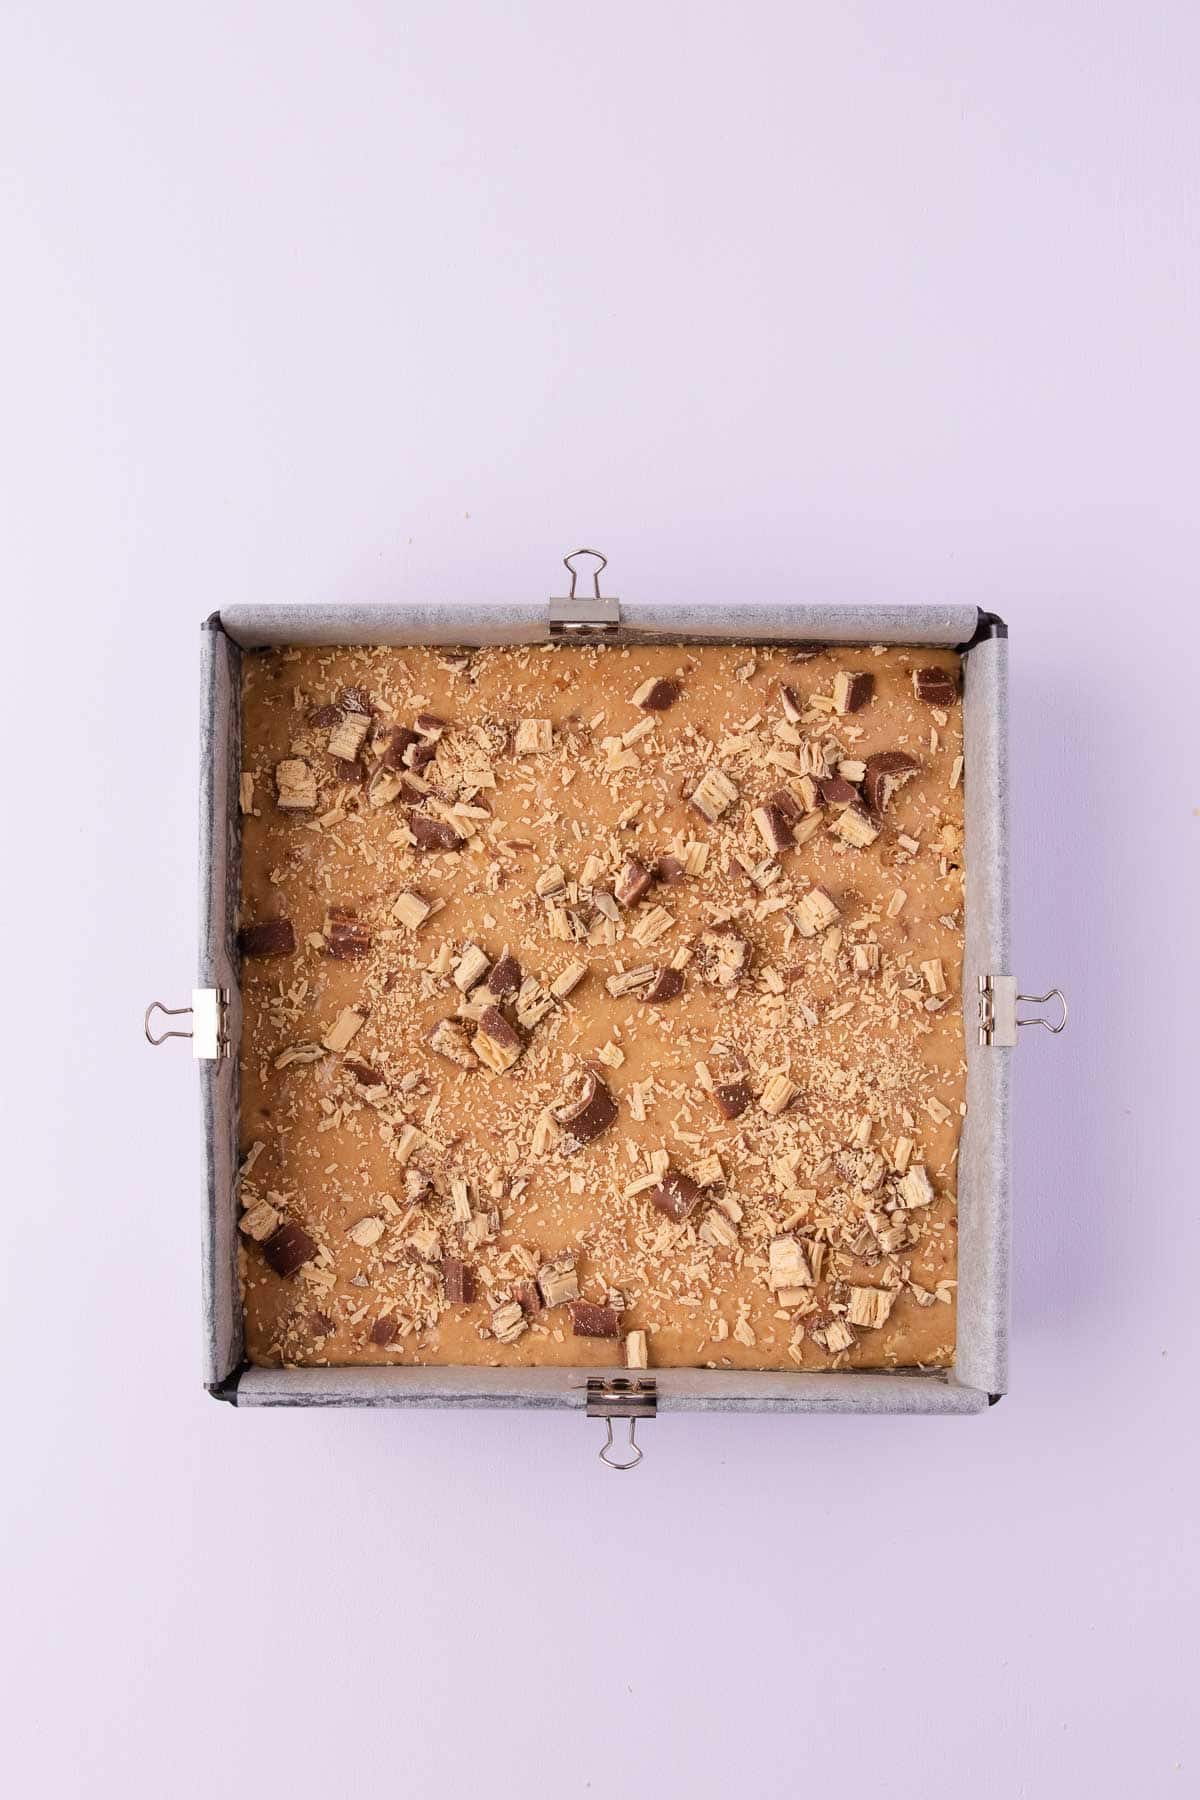 The Caramilk slice mixture pressed into a square cake pan, and sprinkled on top with extra caramilk twirls.